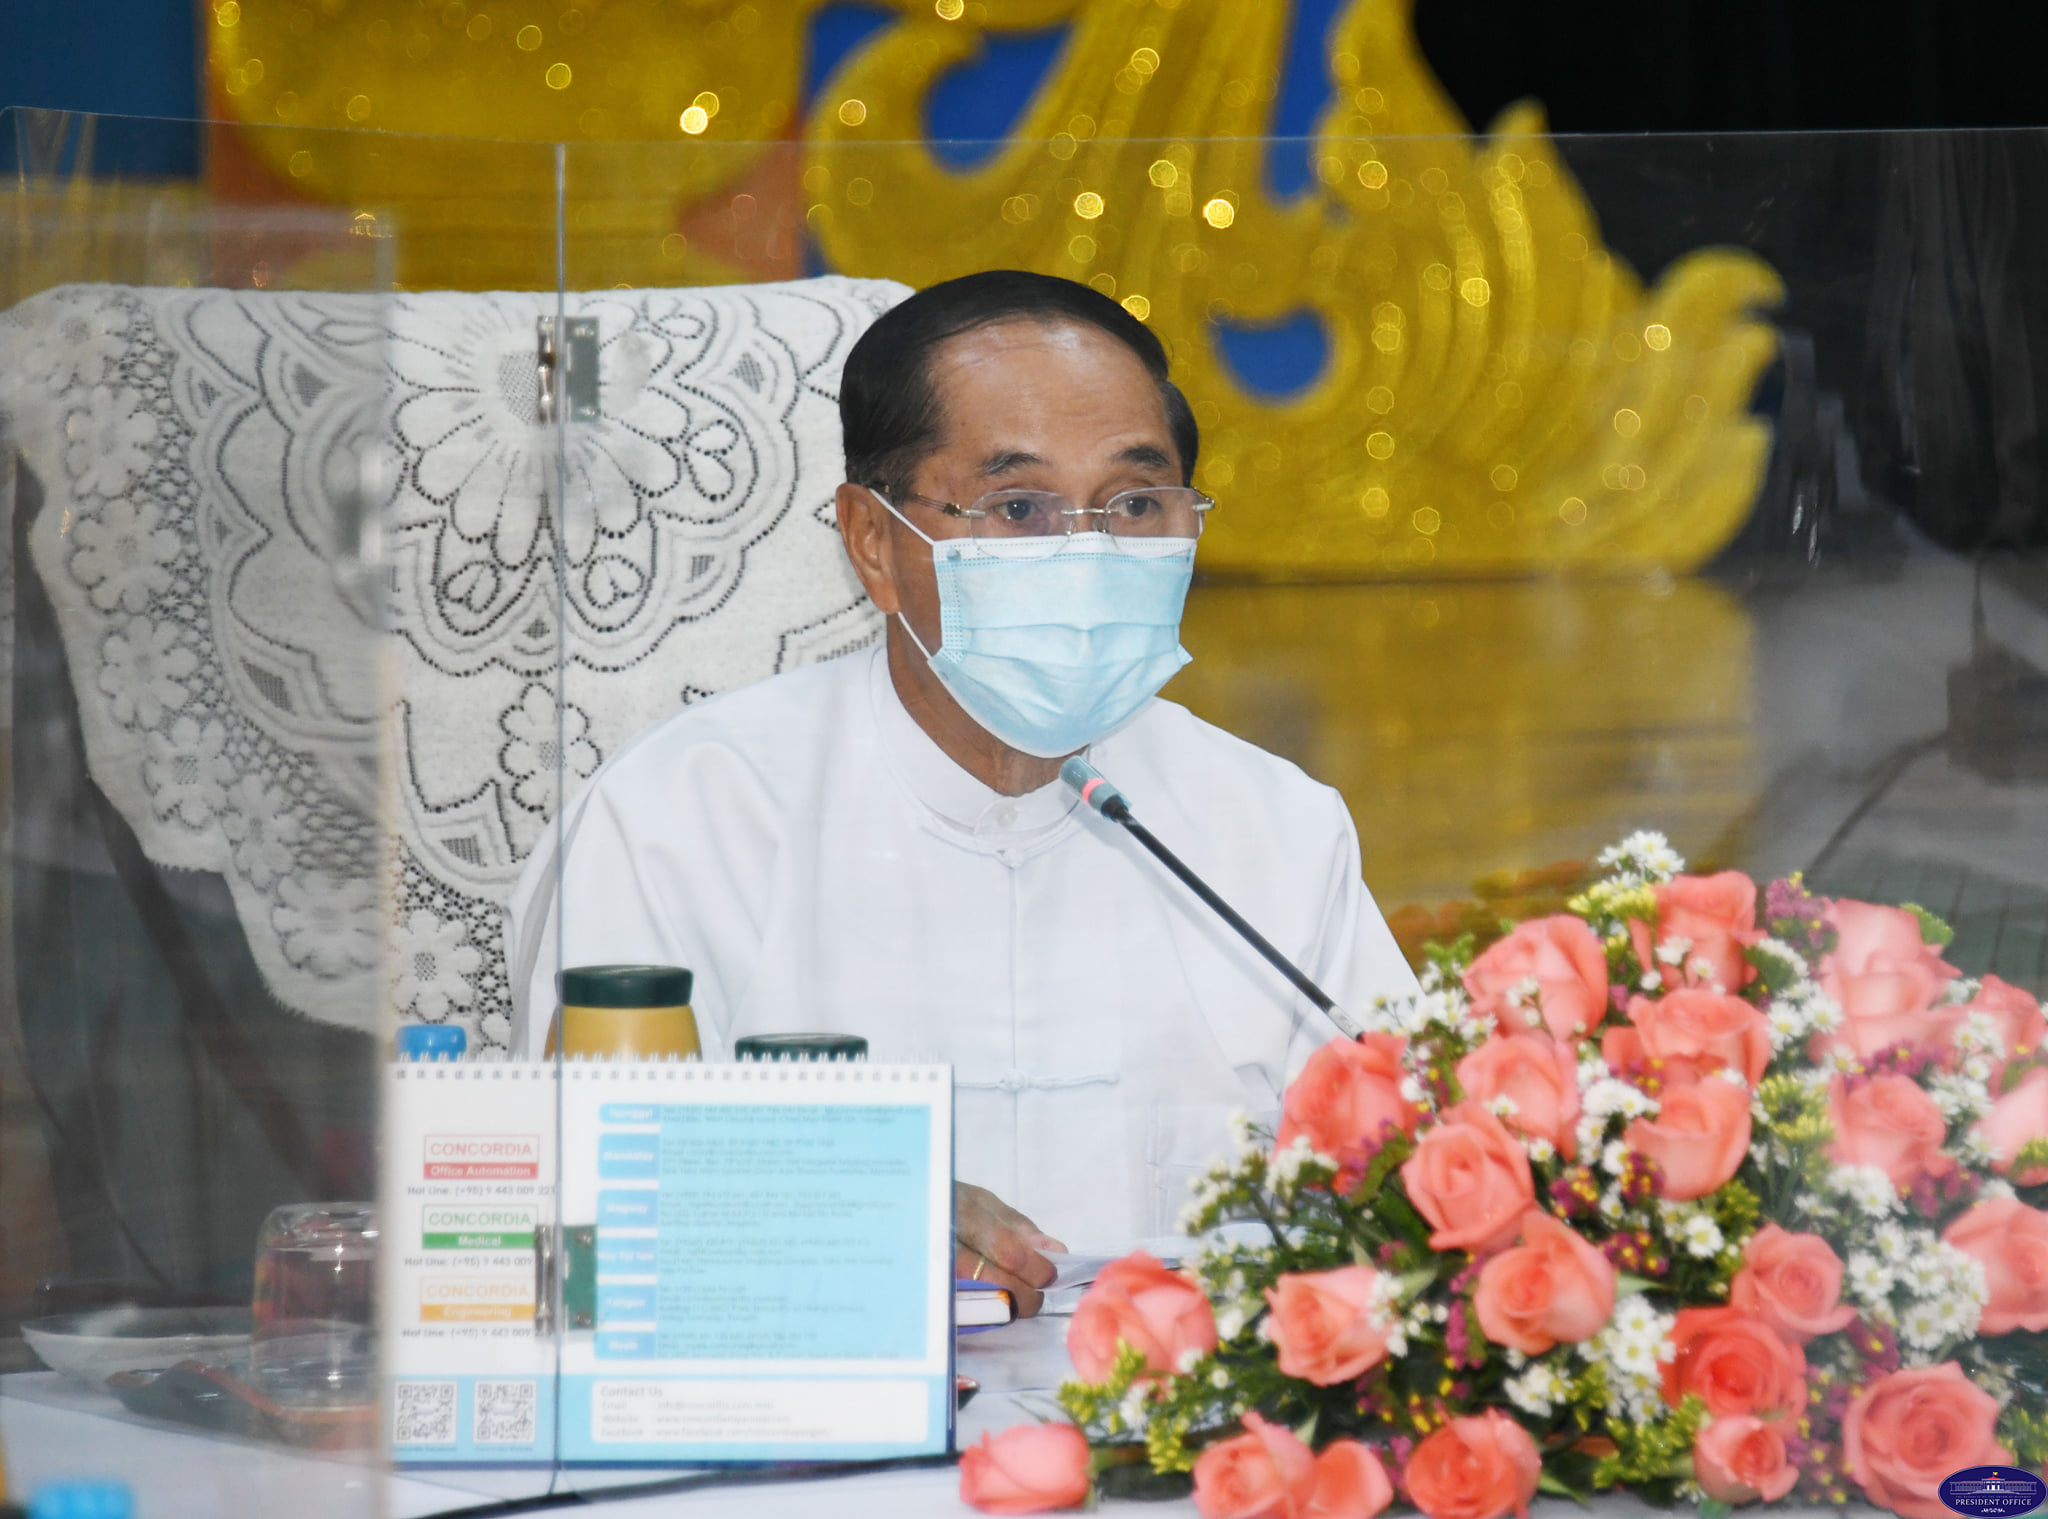 Myanmar's ousted president faces 2 new charges - lawyer